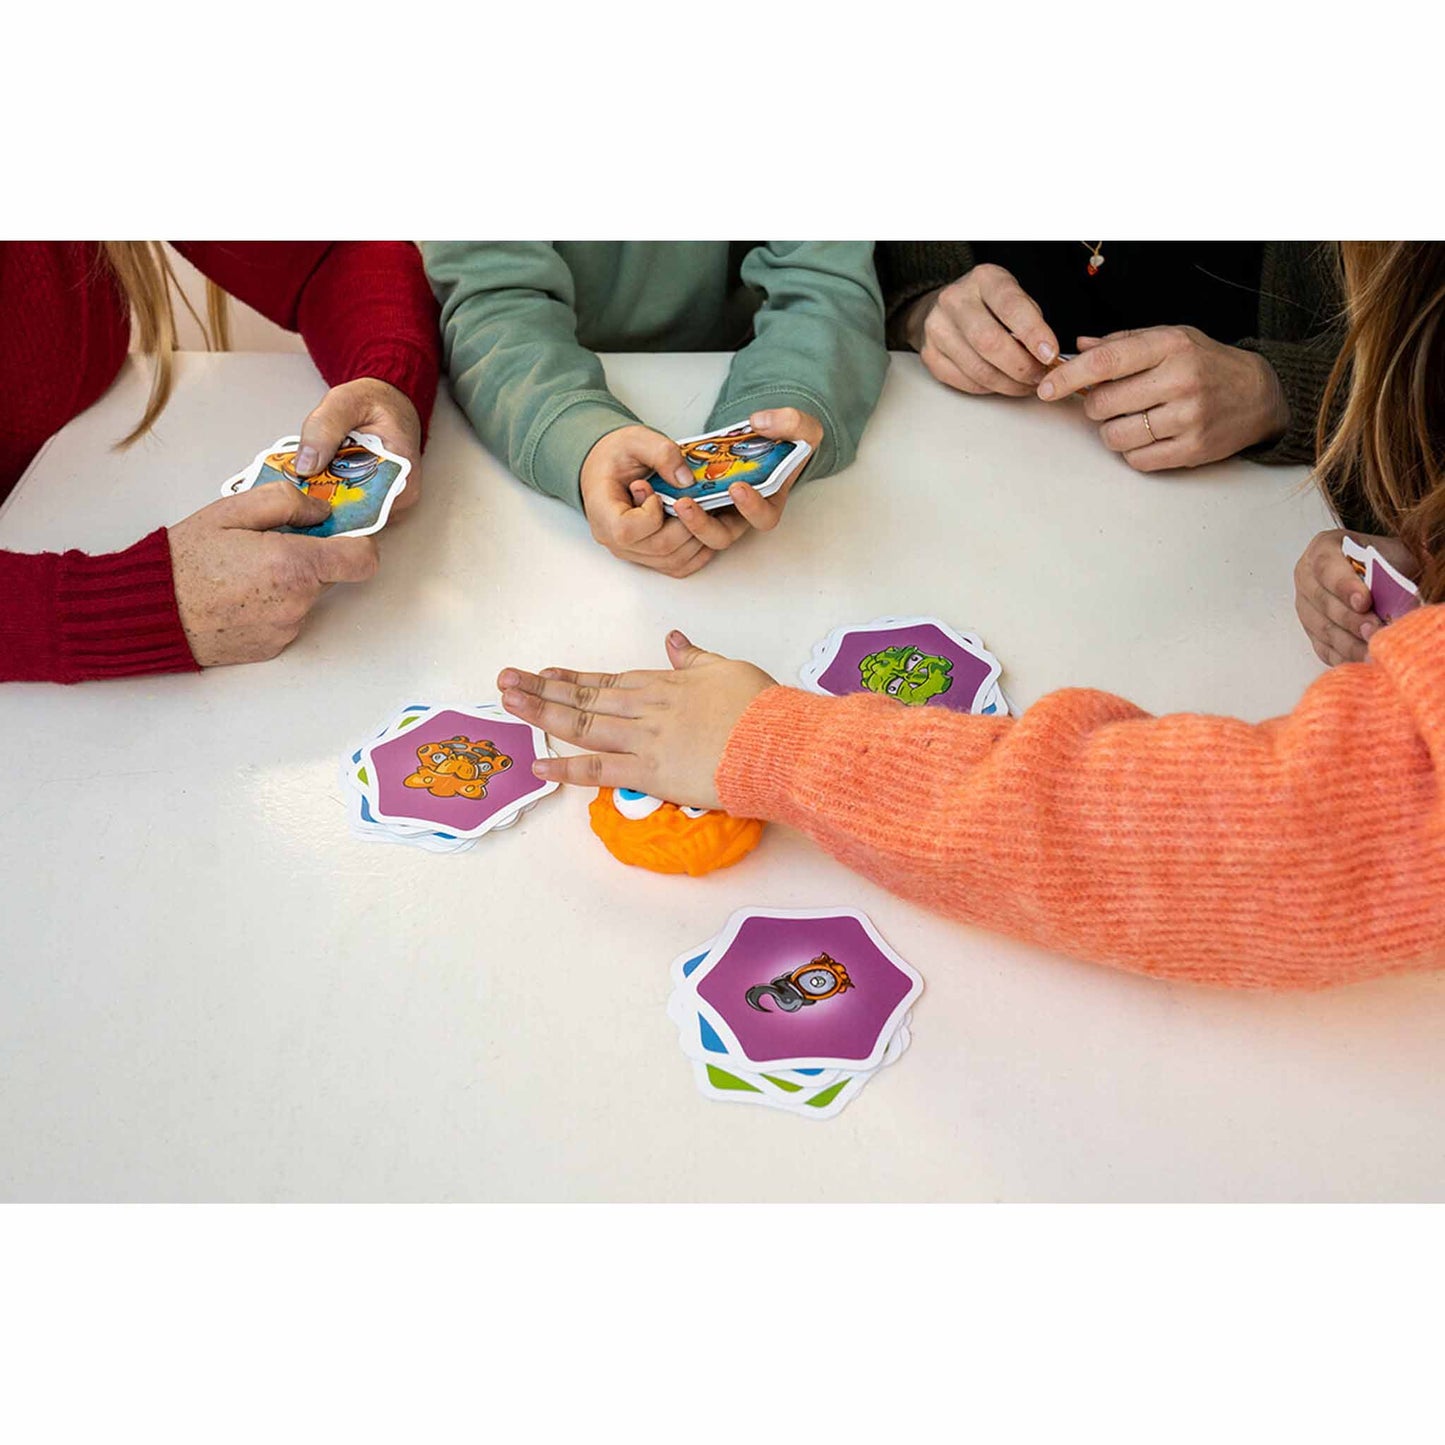 Closeup photo of hands playing Monster Mash game by FLEXIQ.